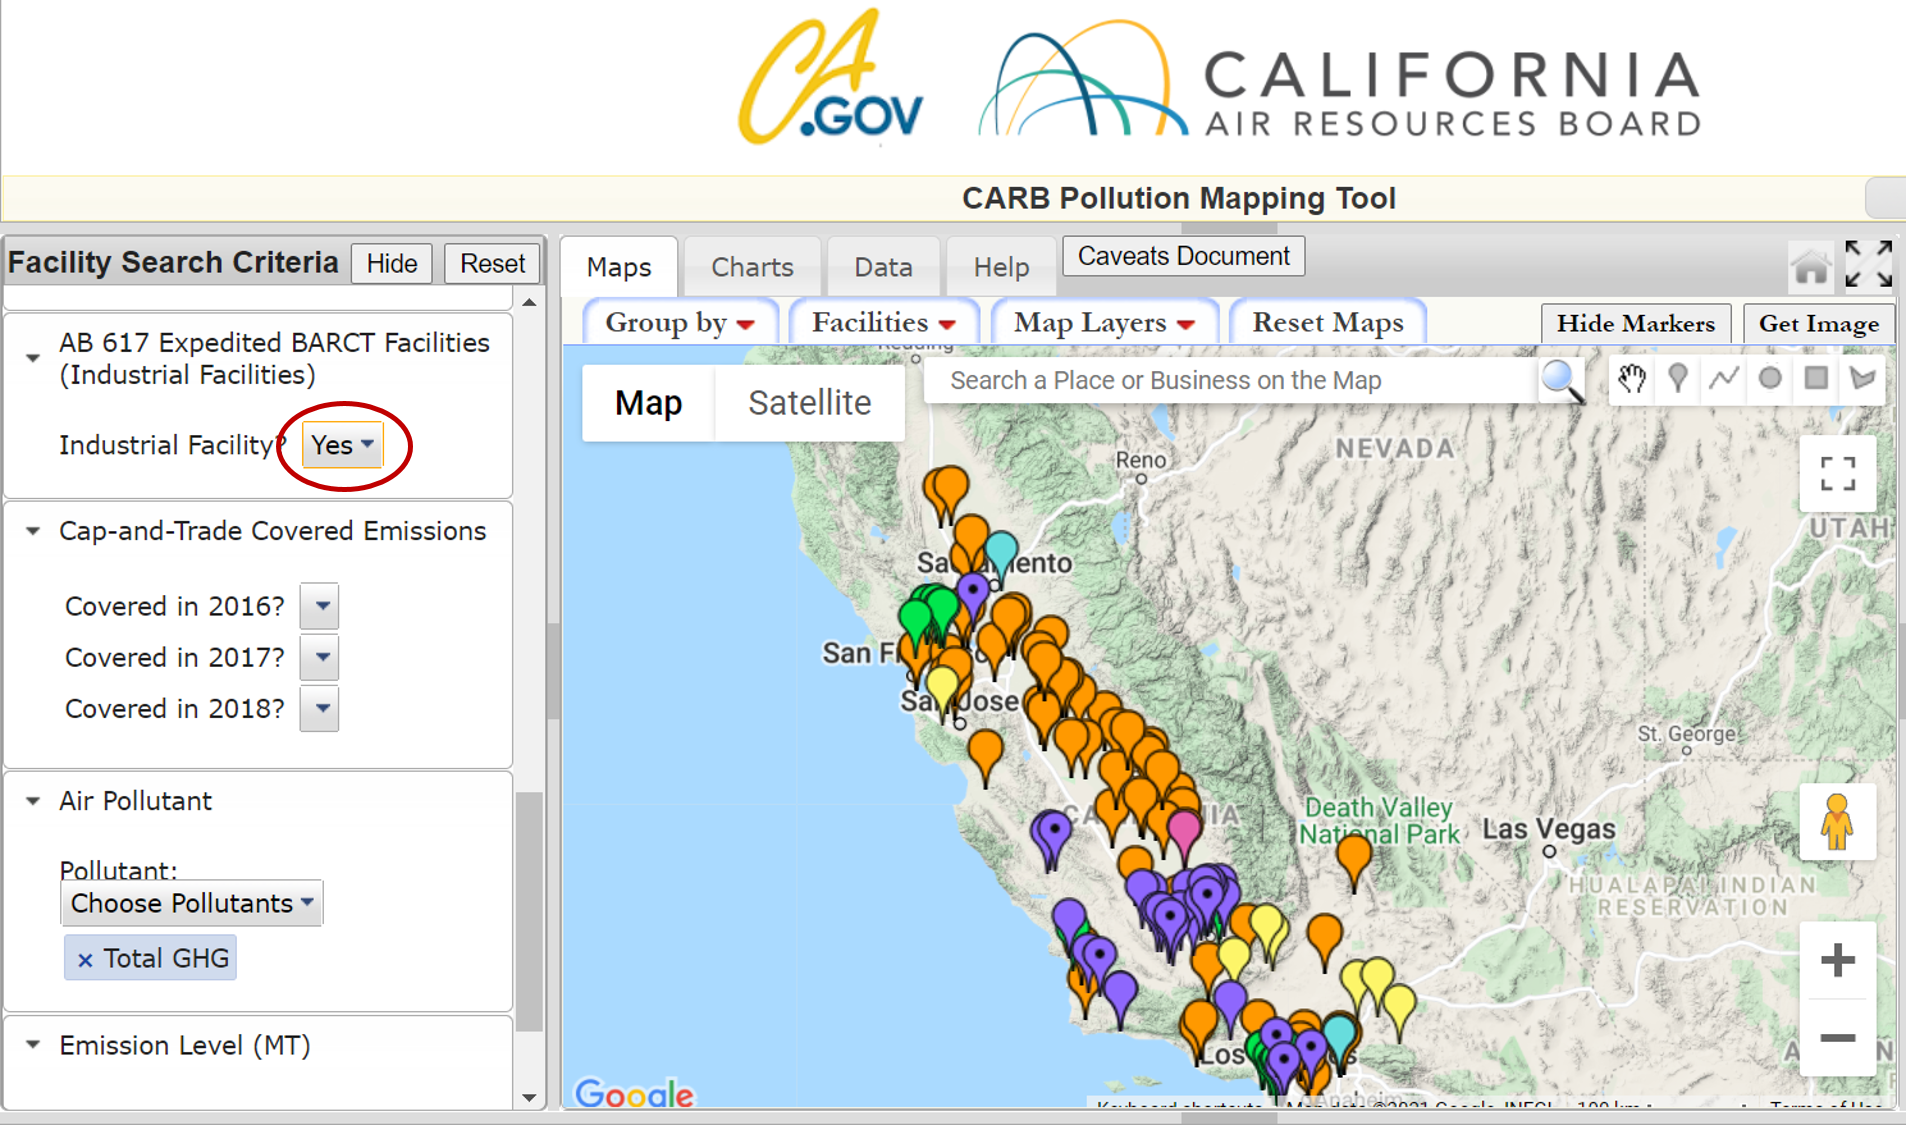 The air pollution mapping tool contains a filter to identify facilities subject to Expedited BARCT requirements